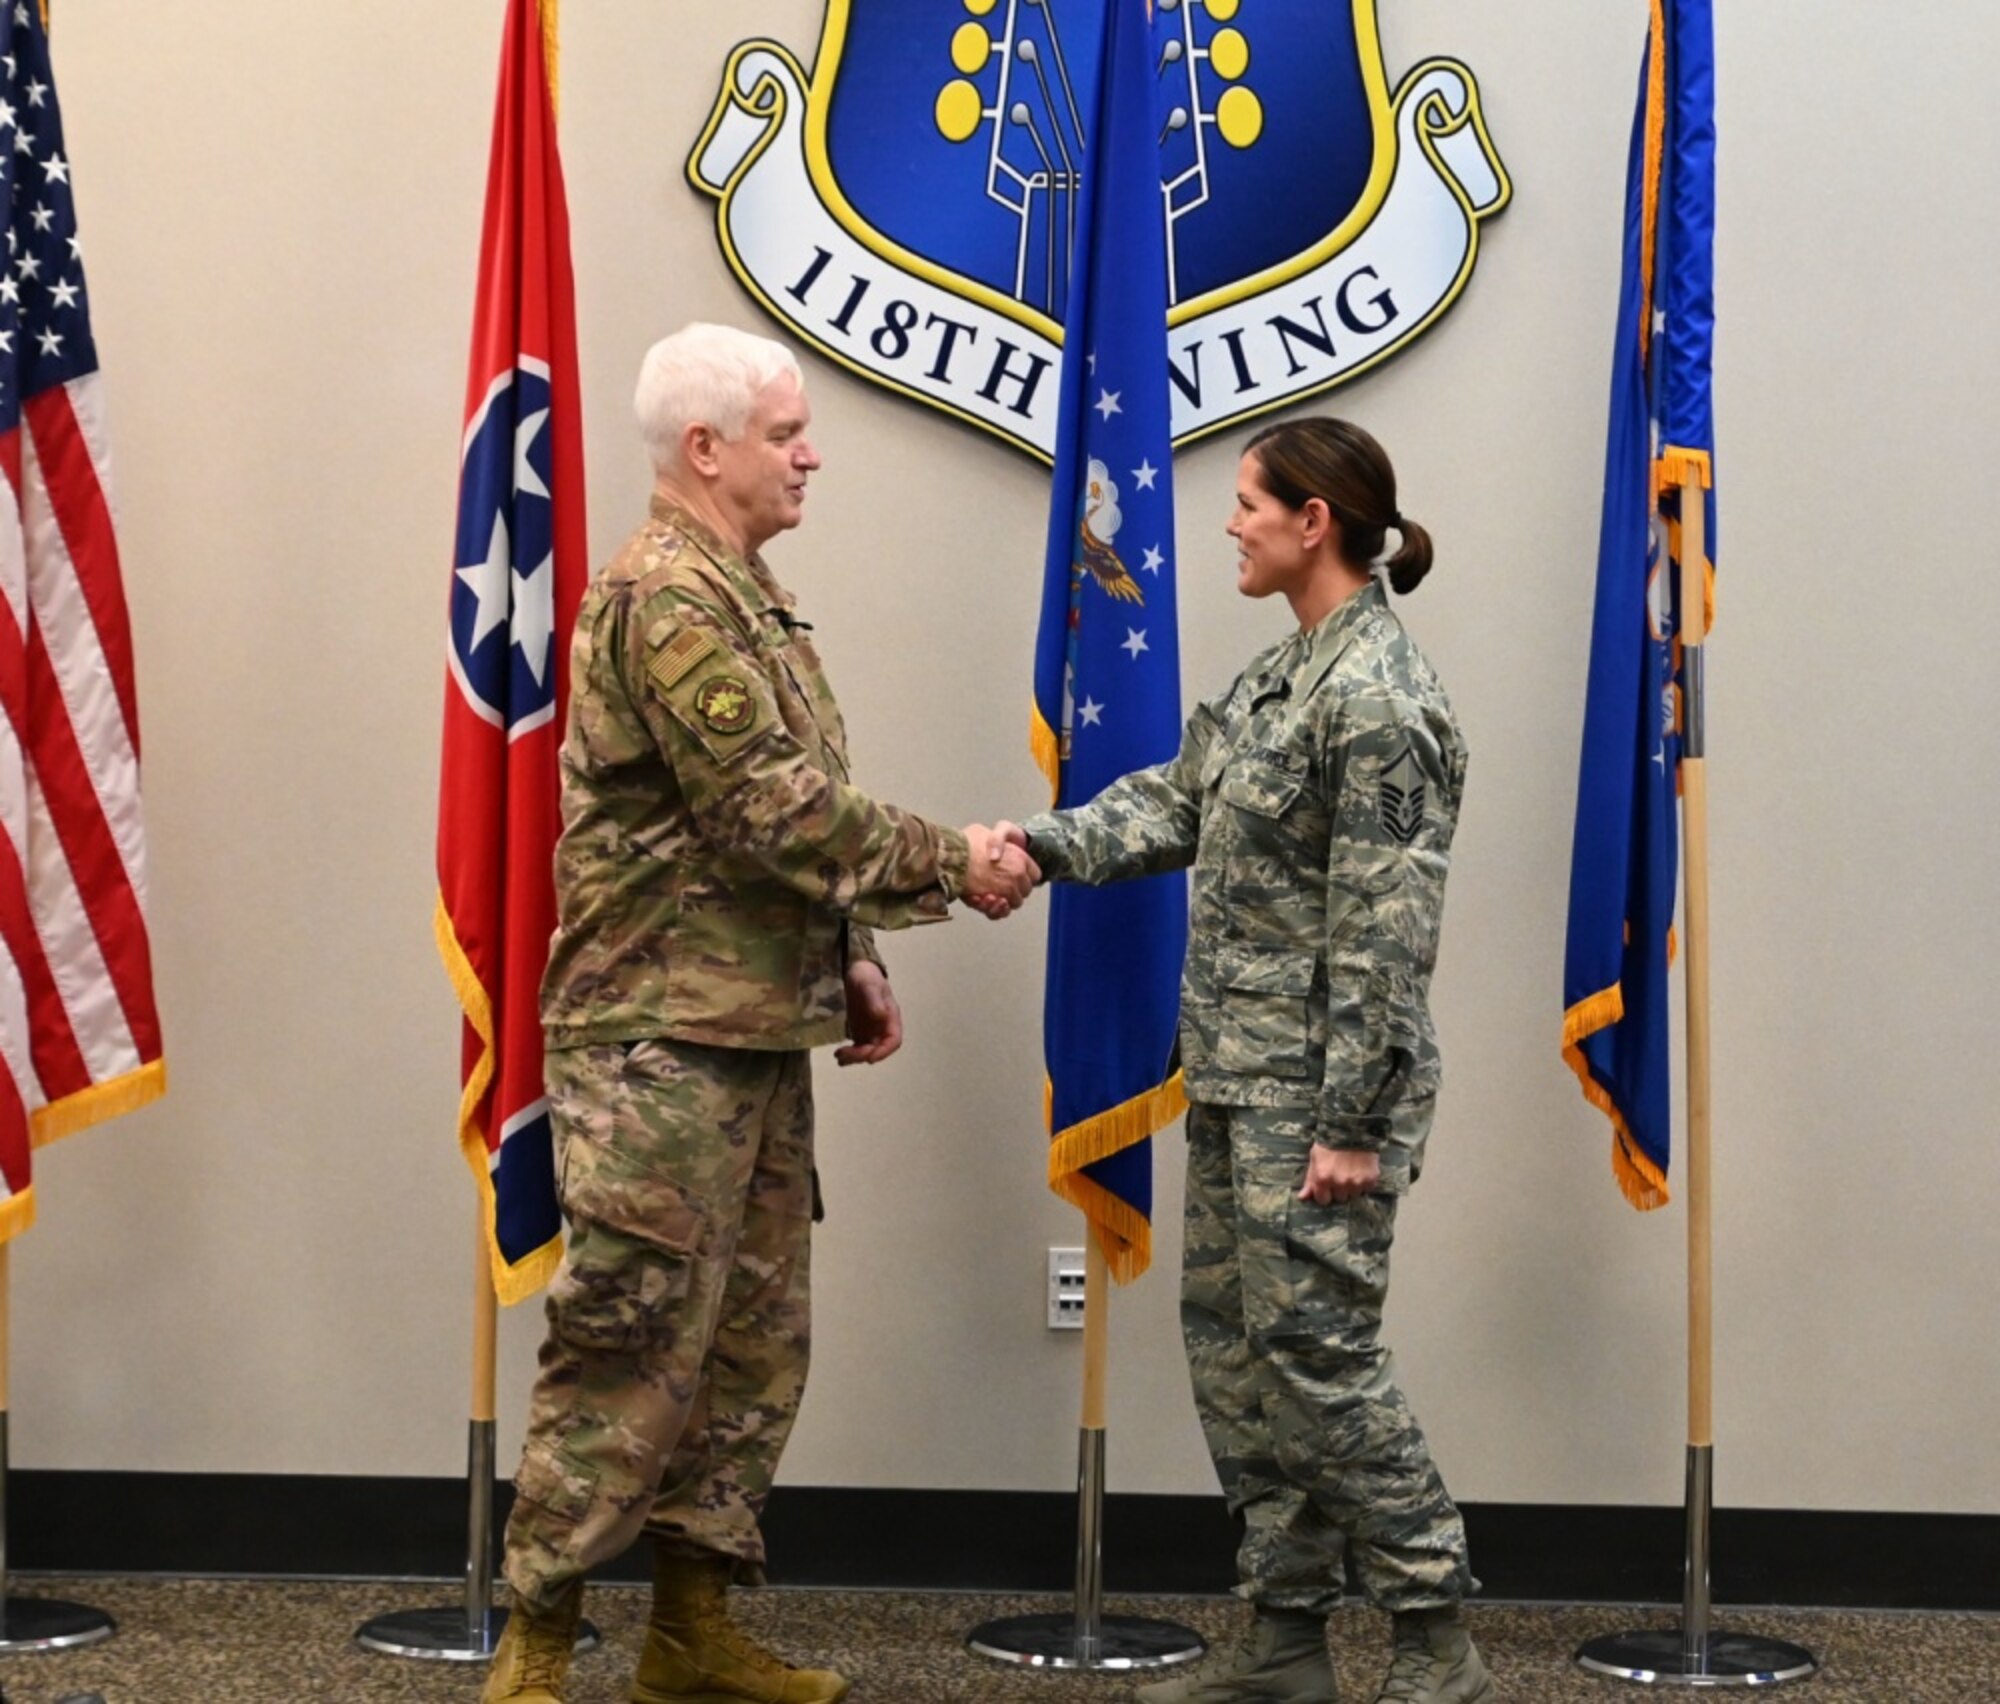 U.S. Air Force Lt. Gen. L. Scott Rice, director of the Air National Guard, coins Master Sgt. Erin Lowell, a supply management technician with the 118th Logistics Readiness Squadron, Dec. 6, 2019 at Berry Field Air National Guard Base, Nashville, Tenn. Rice’s trip to the 118th Wing was his final stop in his visit to all 90 wings in the ANG during his tenure as director. (U.S. Air National Guard photo by Staff Sgt. Anthony Agosti)